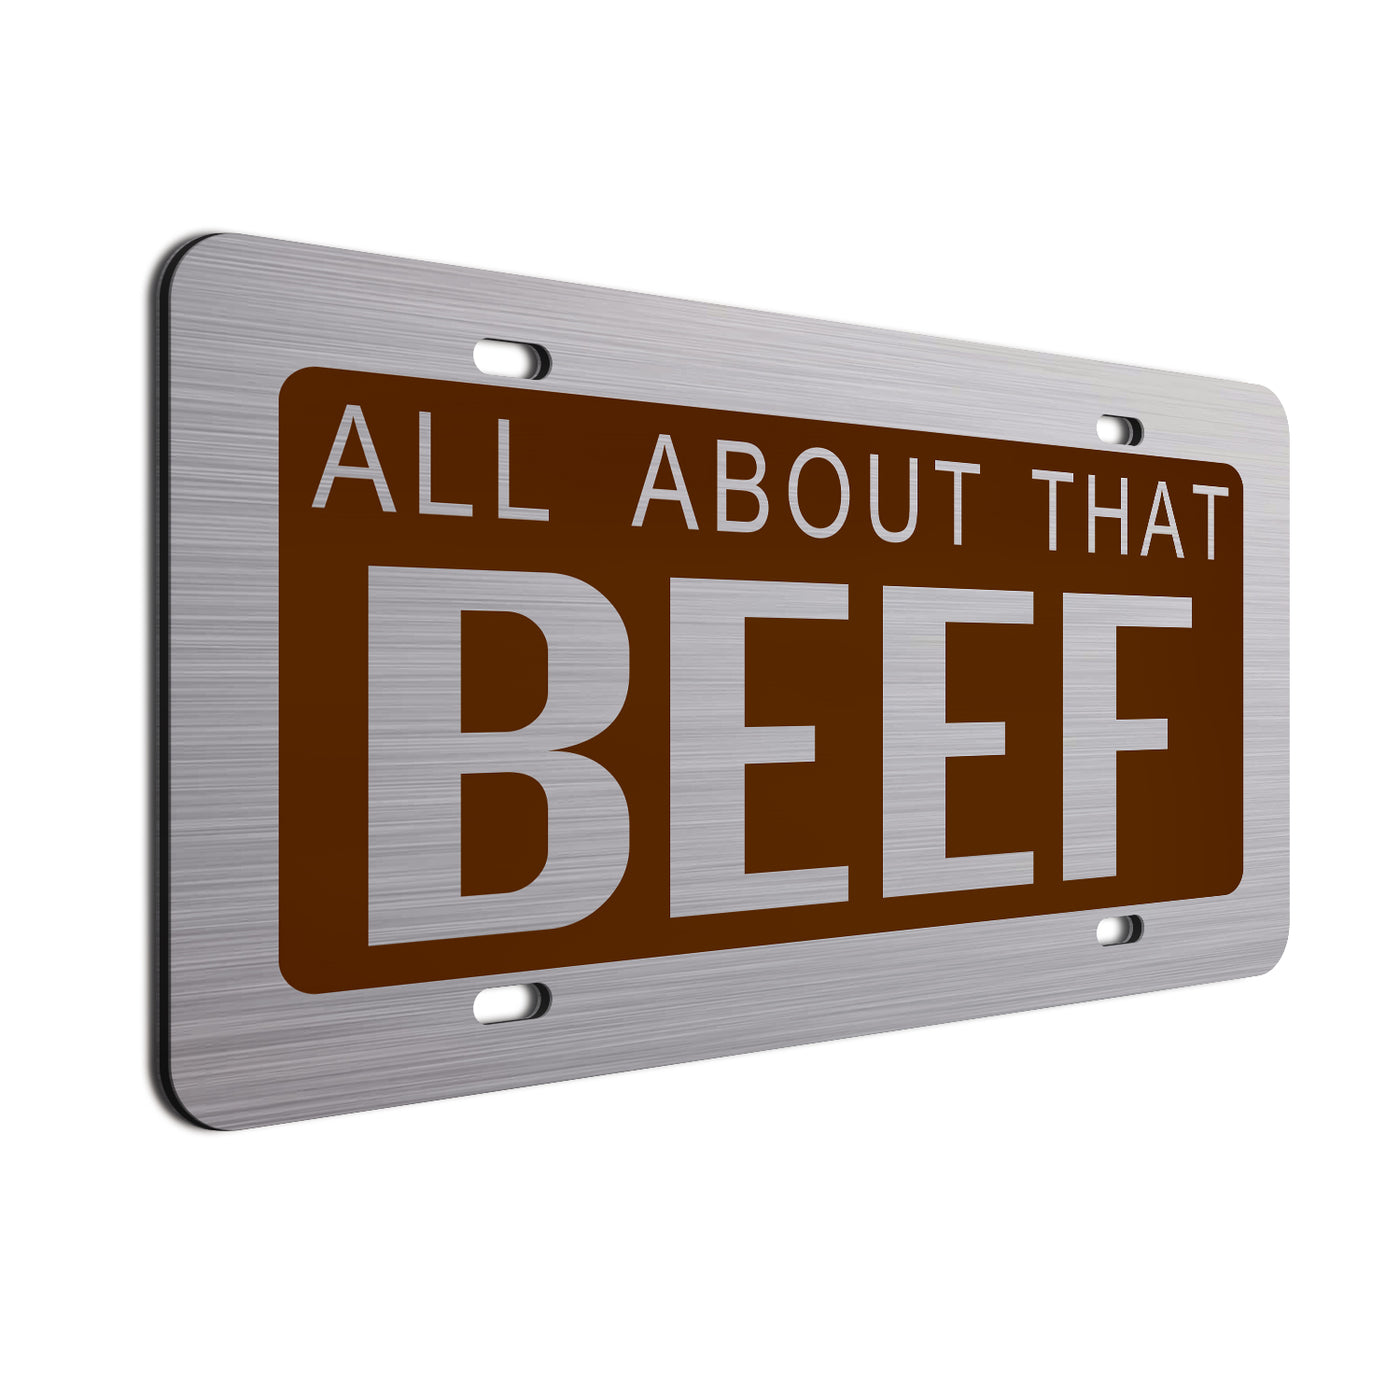  All About That Beef car tag Brown